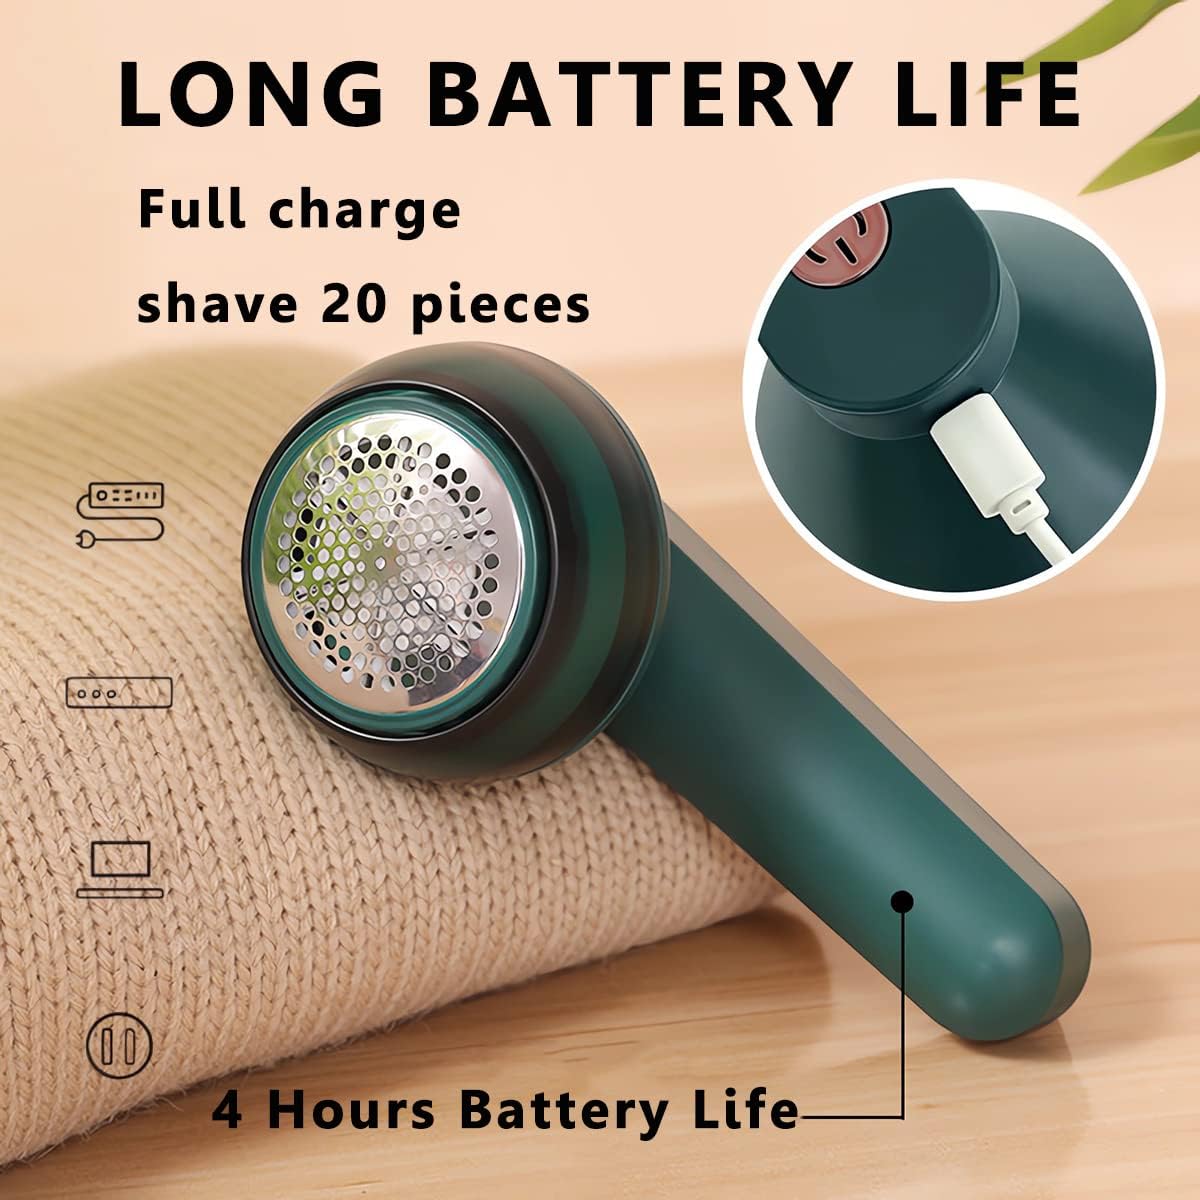 PowerLint™ Revive - Rechargeable Lint Remover